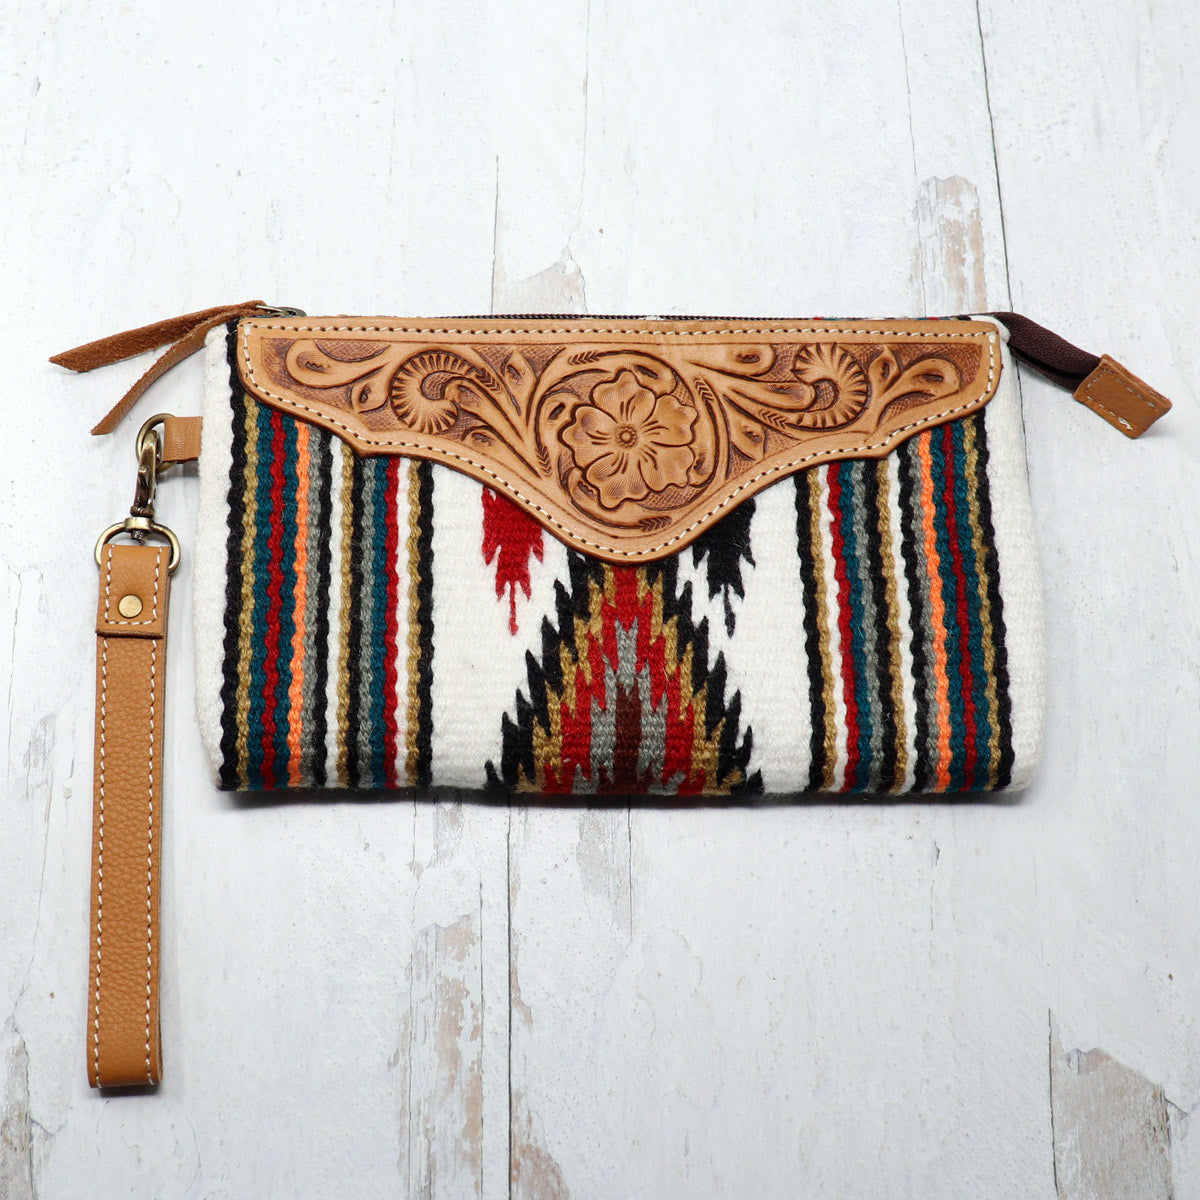 Handtooled Leather & Woven Wristlet